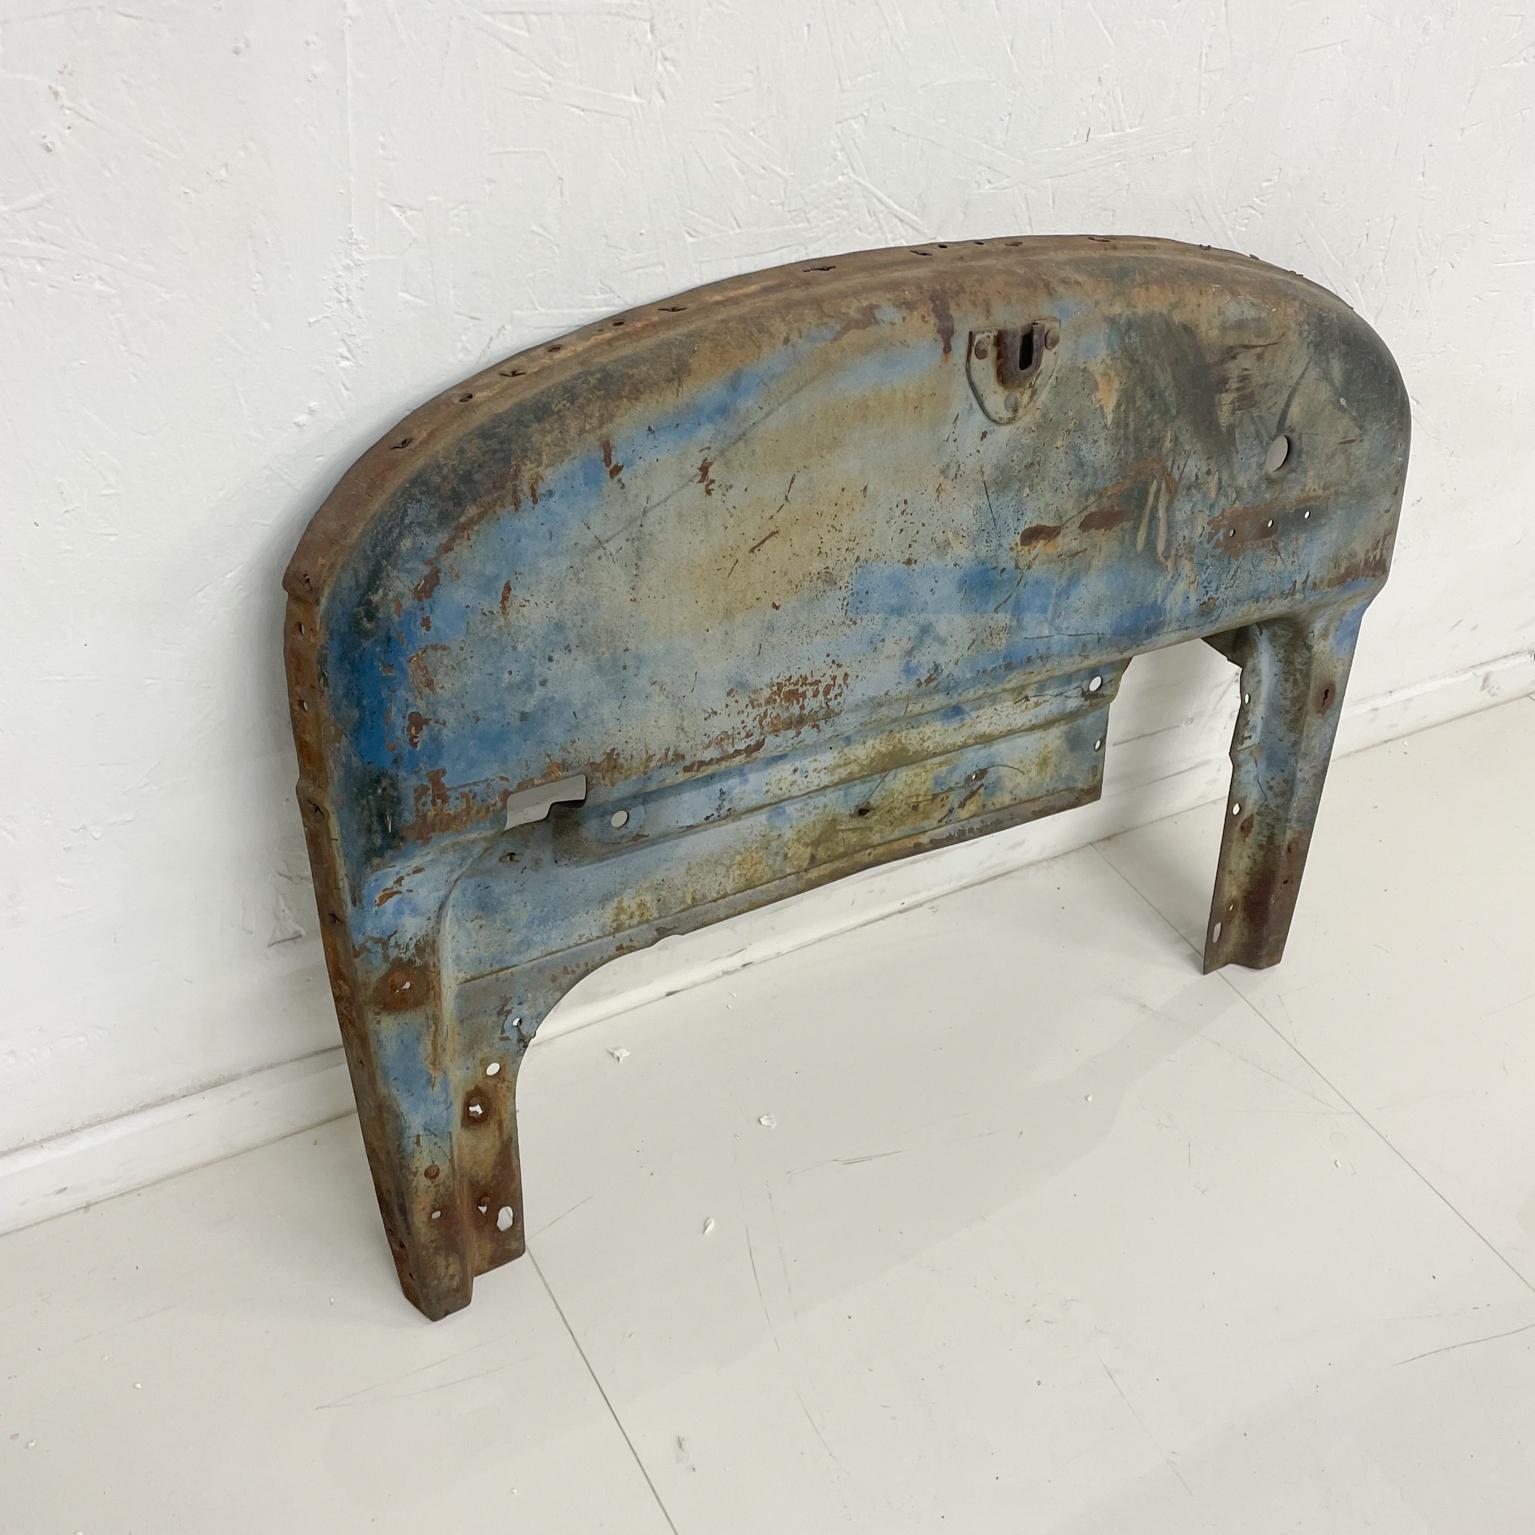 Salvaged Art Industrial Blue Beauty Oxidized Metal Piece Tarnished Distress In Distressed Condition In Chula Vista, CA